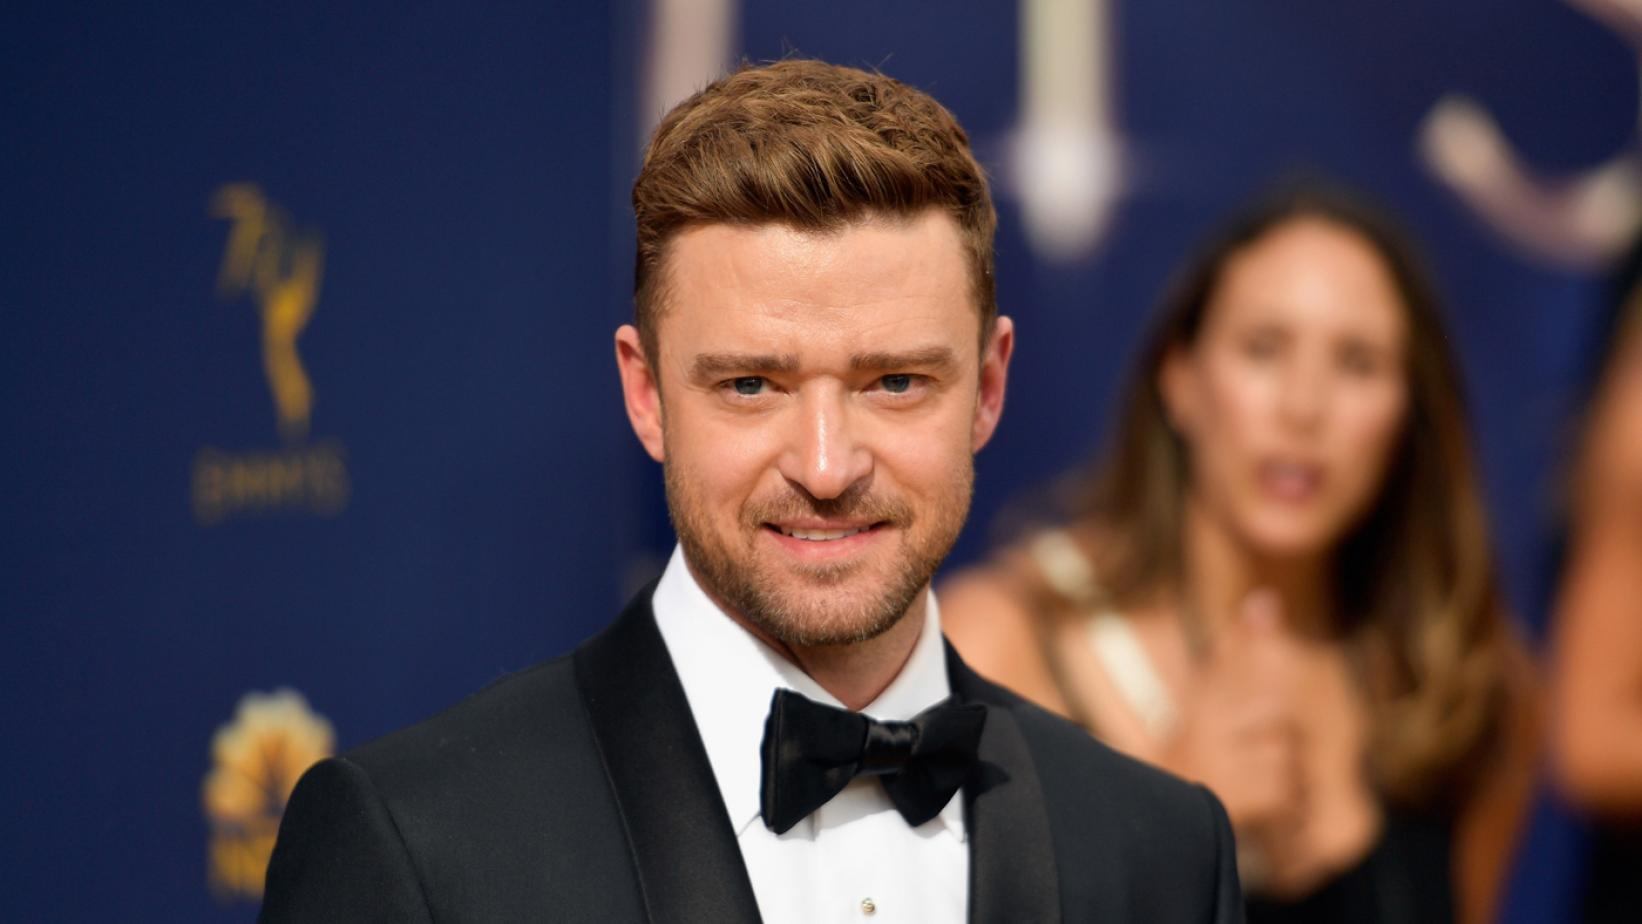 The Life of Justin Timberlake: From the Mickey Mouse Club to Millionaire Philanthropist